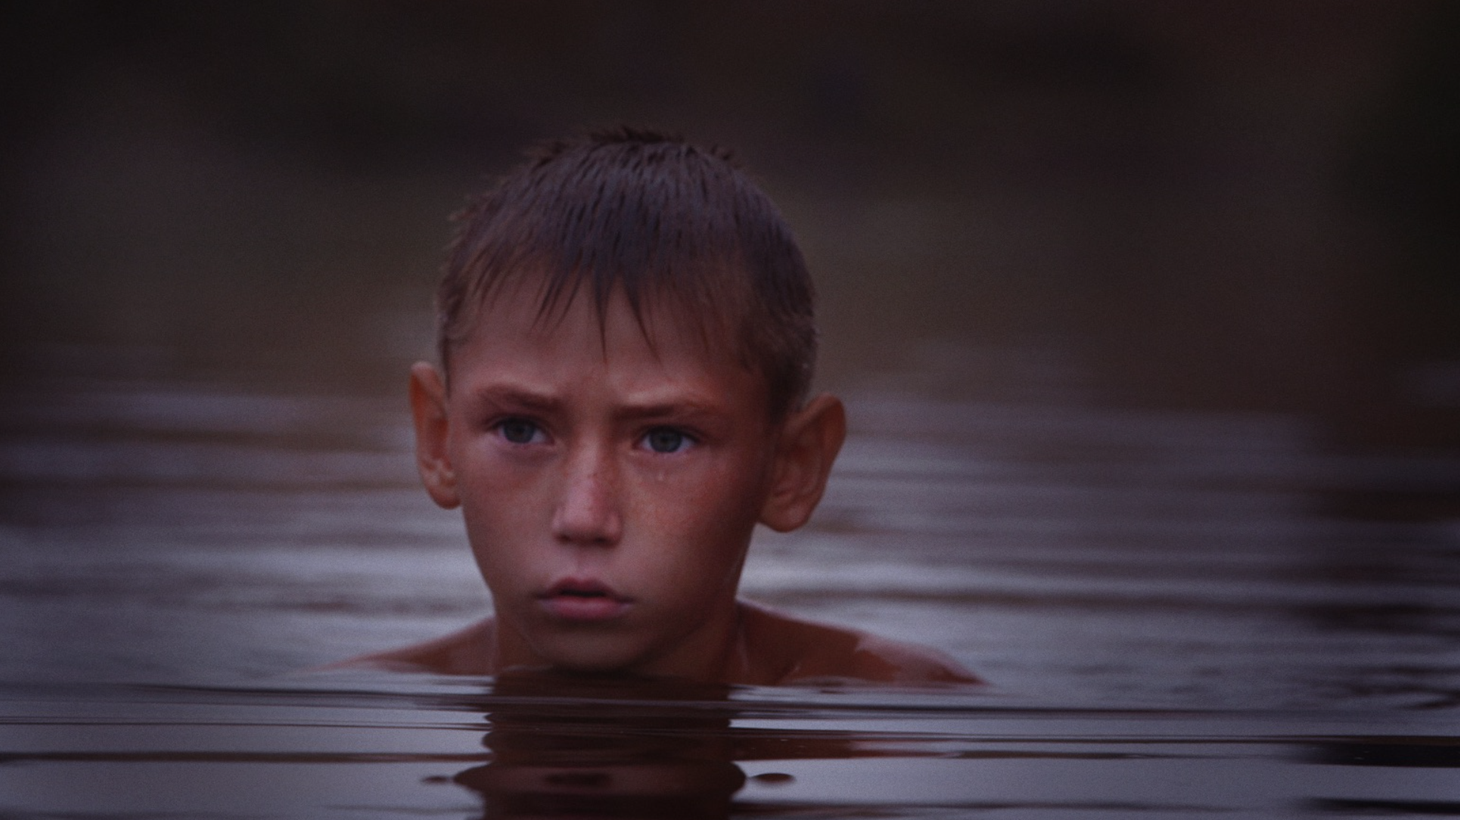 “The Distant Barking of Dogs,” Wilmont describes the life of a young boy, Oleg, living near the frontline of the war with his grandmother. The documentary focuses on everyday survival of the war — how Oleg endures it with his grandmother, and the loss of innocence that comes with war.